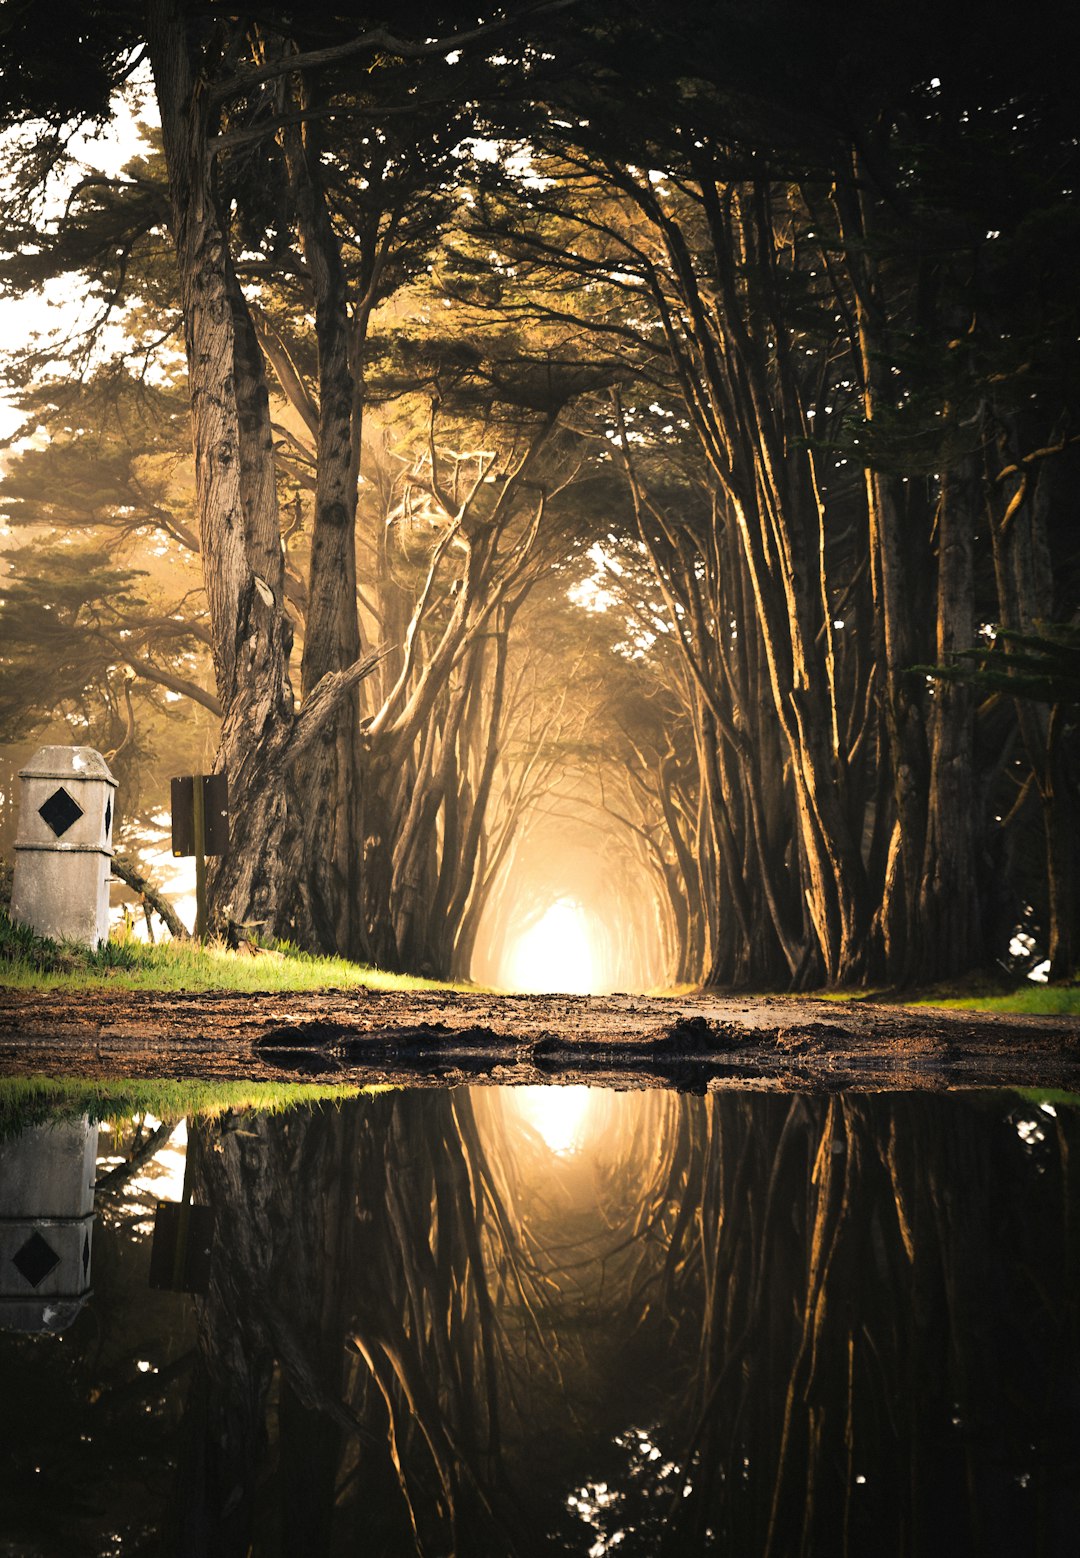 a photo of the entrance to an old cypress tree tunnel in northern california, with tall trees on both sides and light coming through at end of tunnel, there is water reflecting sunlight on ground, a white sign stands beside road, golden hour lighting, foggy atmosphere, –ar 11:16